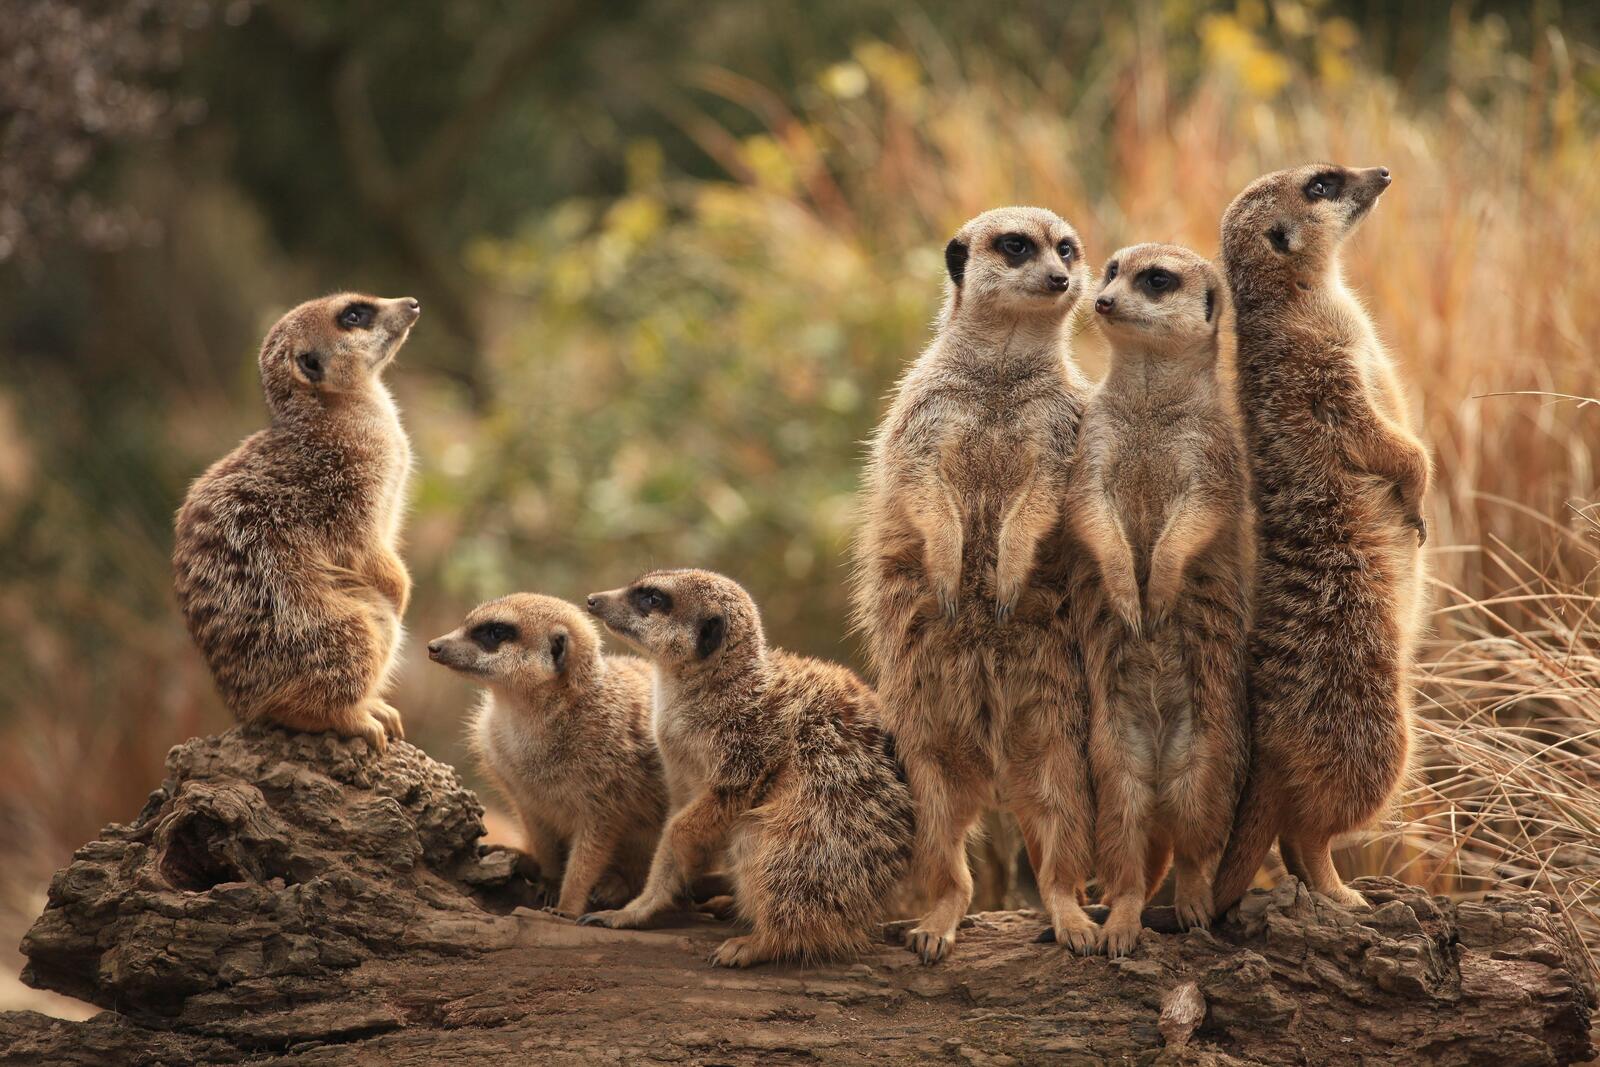 Free photo What are these funny meerkats))